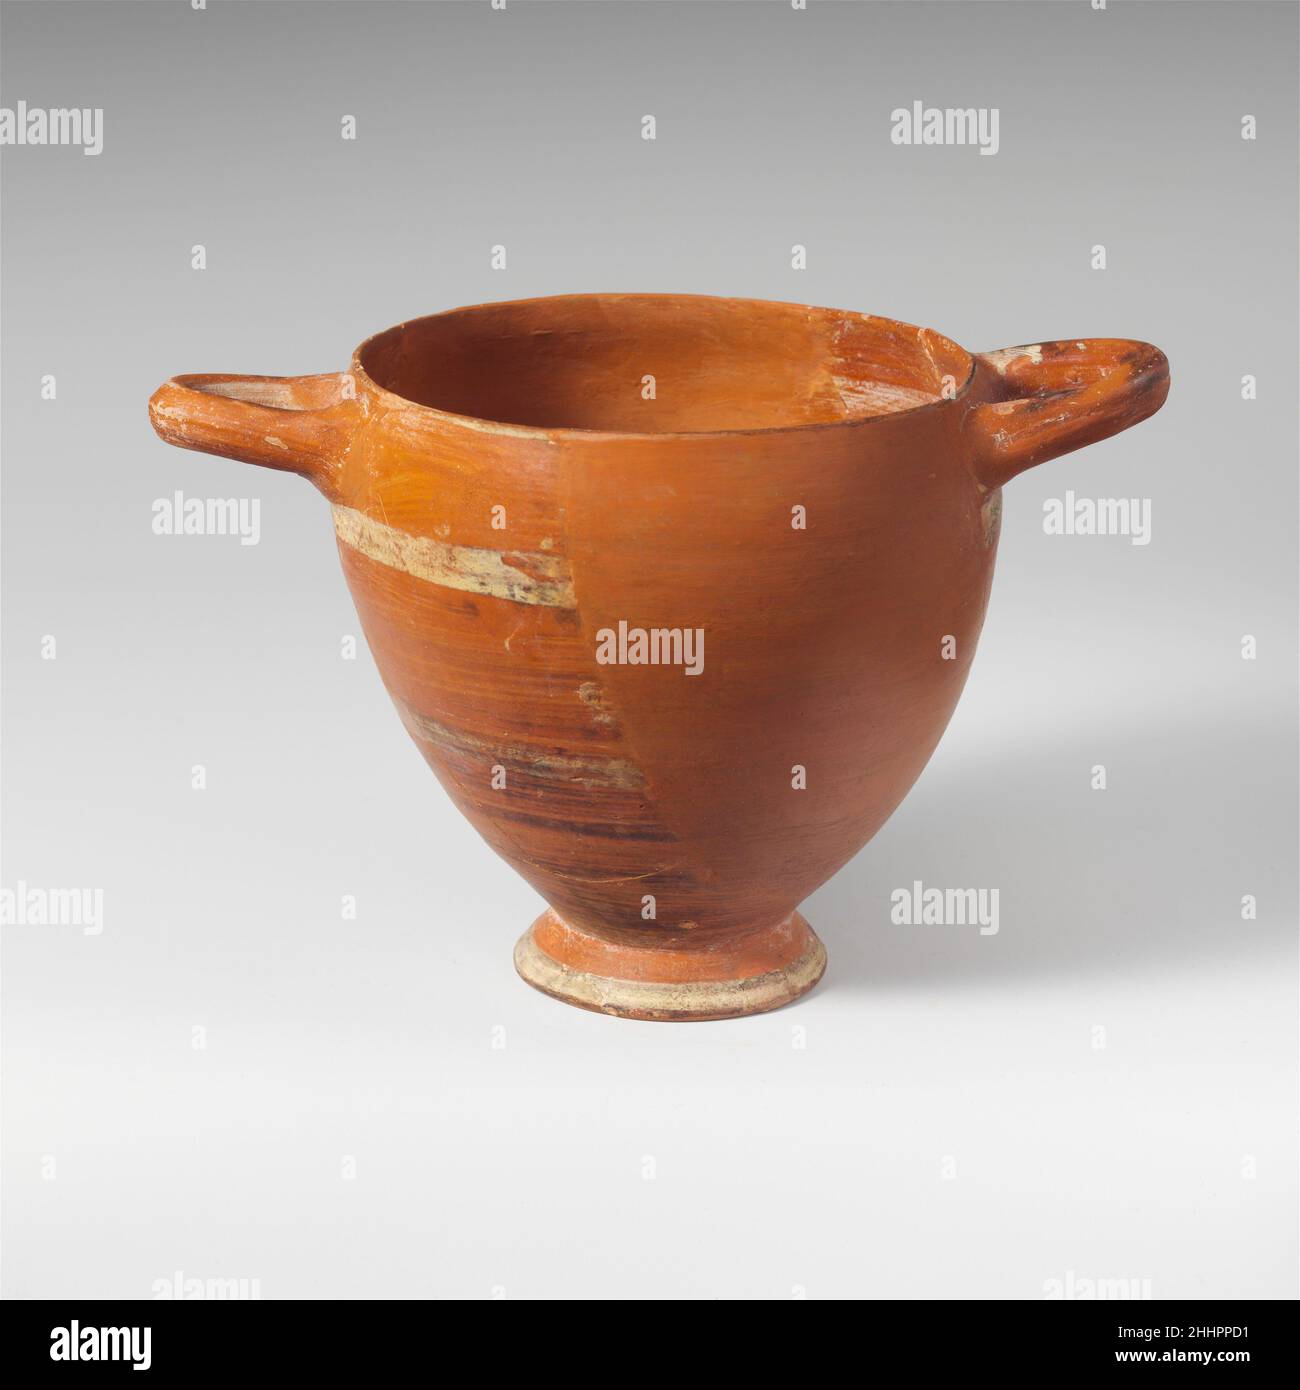 Terracotta skyphos (deep drinking cup) 6th century B.C. Lydian Red ware with horizontal bands of white.. Terracotta skyphos (deep drinking cup)  249080 Stock Photo